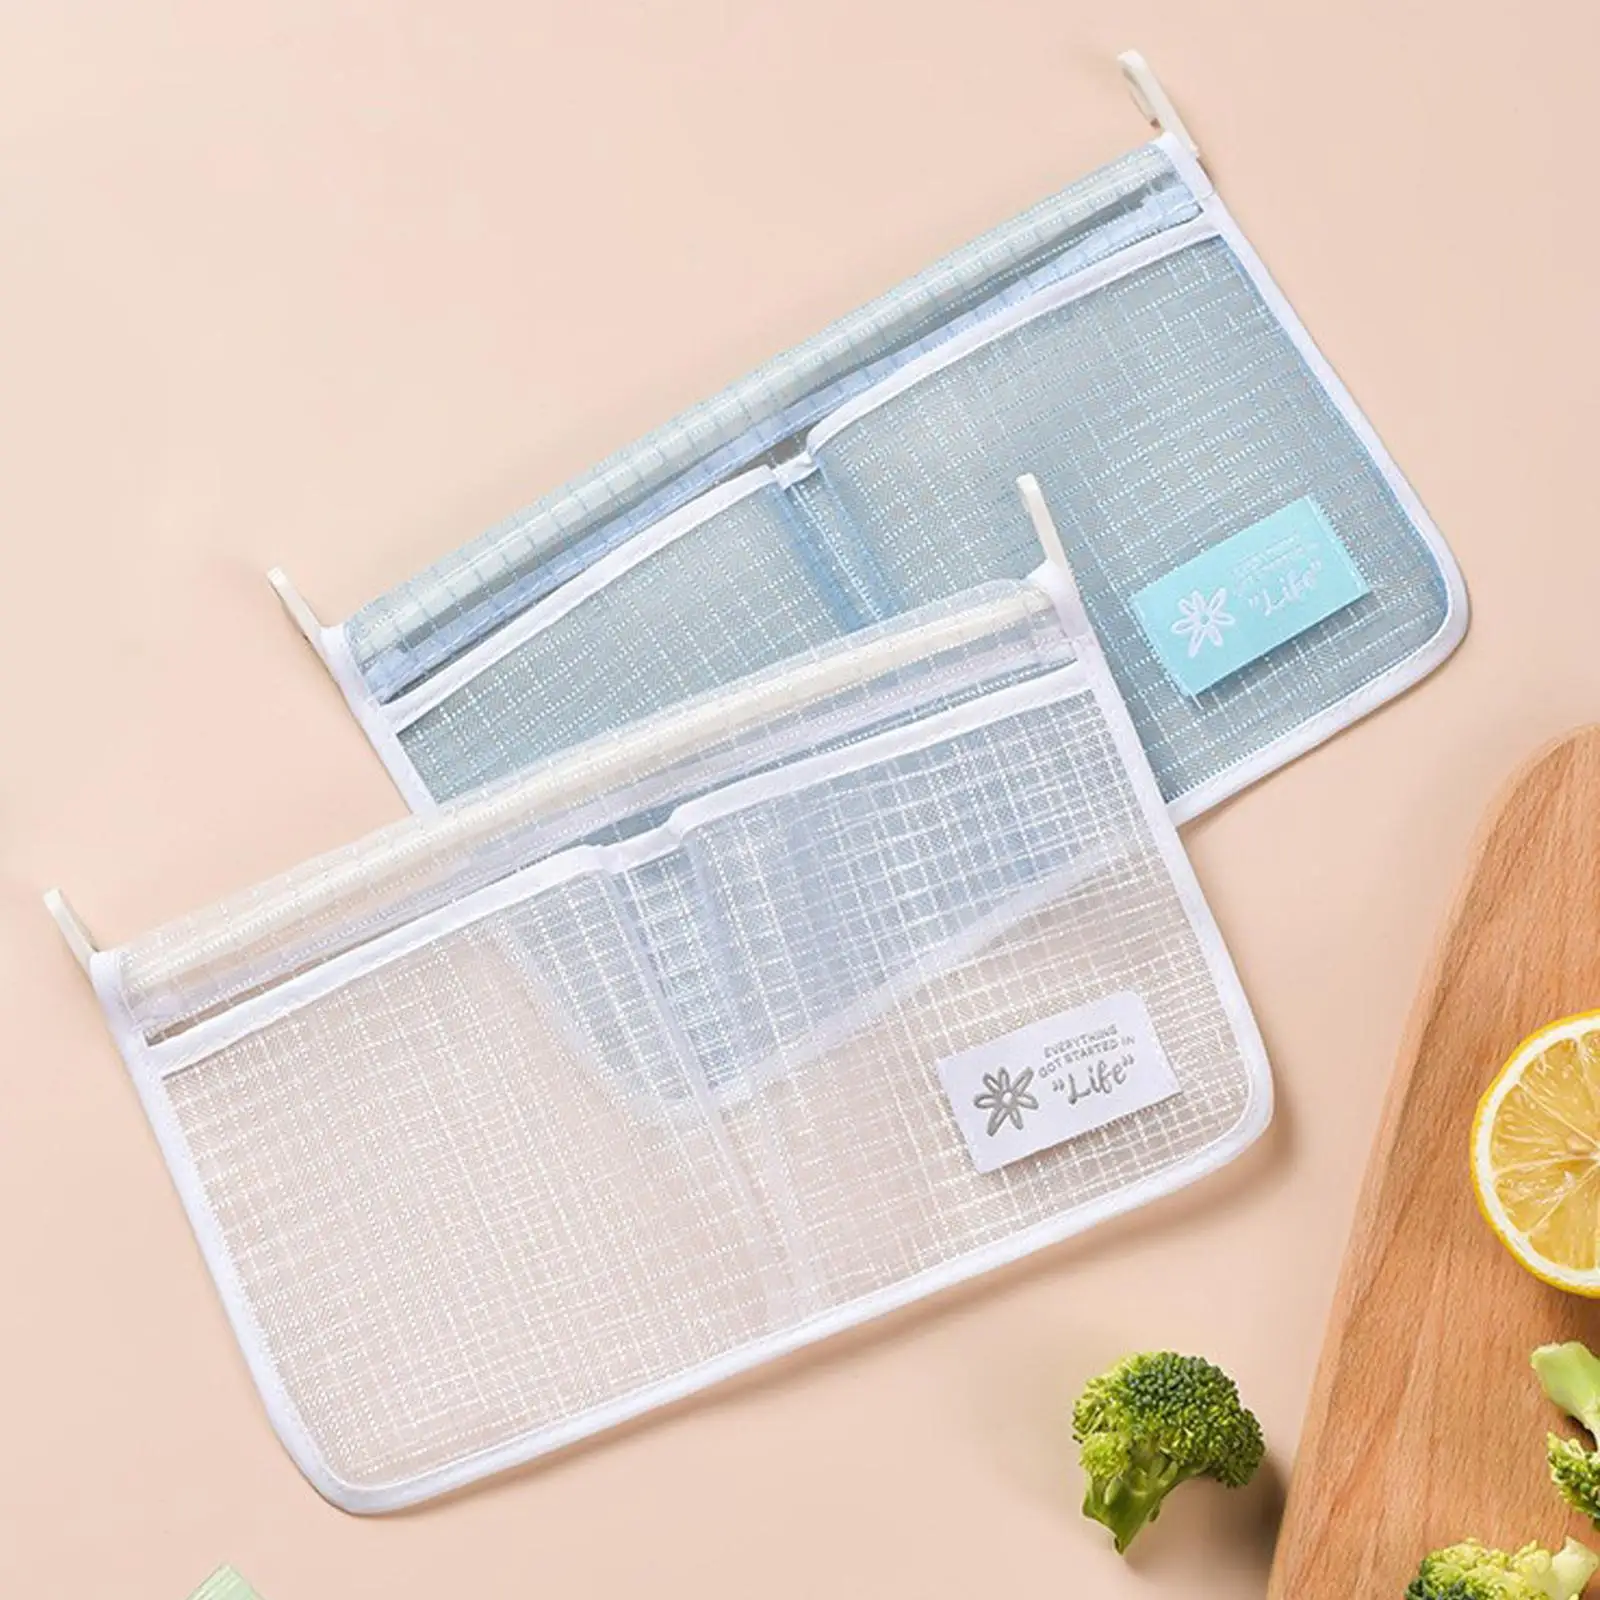 Fridge Storage Mesh Bags Multifunction Makeup Holder Tote Bags Double Compartment Hanging Organizer Bags with Hooks